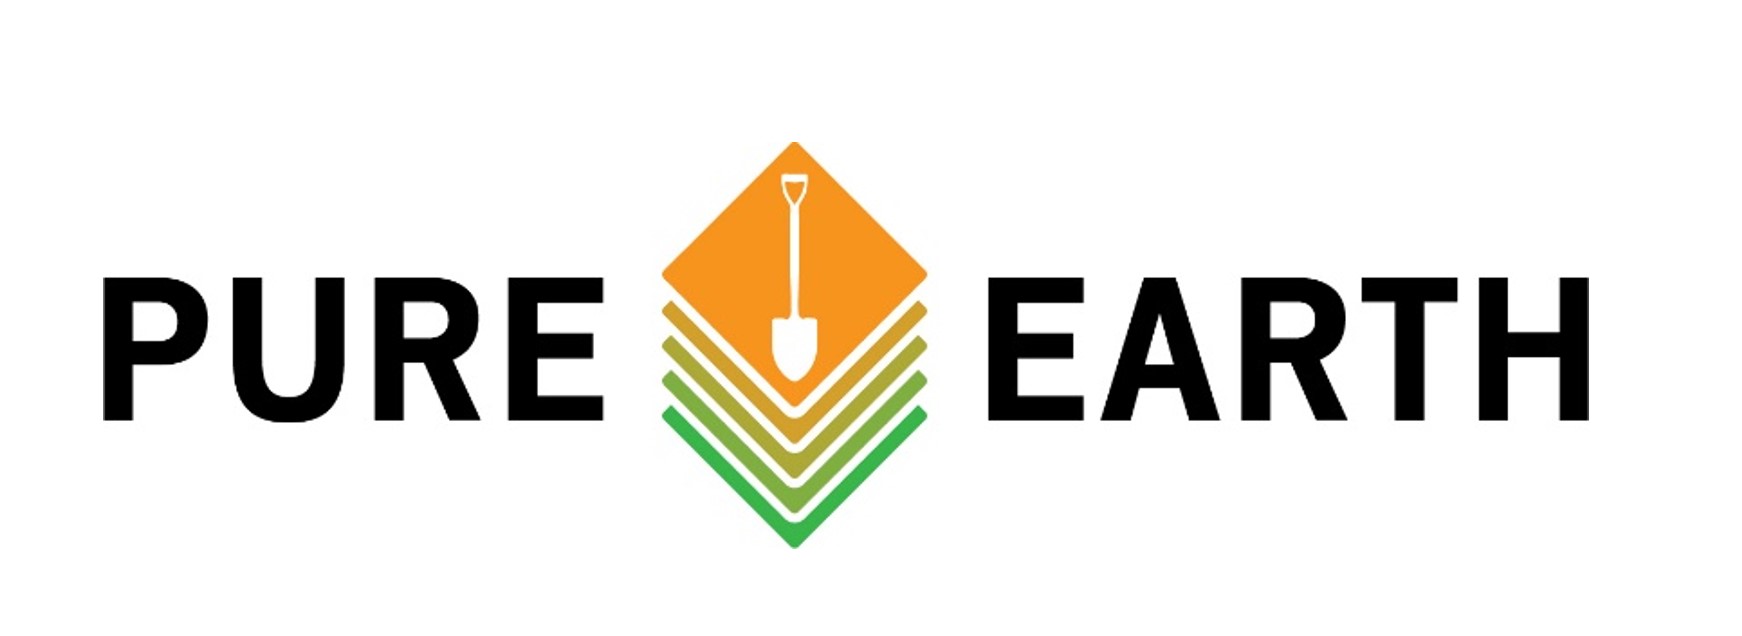 Pure Earth_logo.png